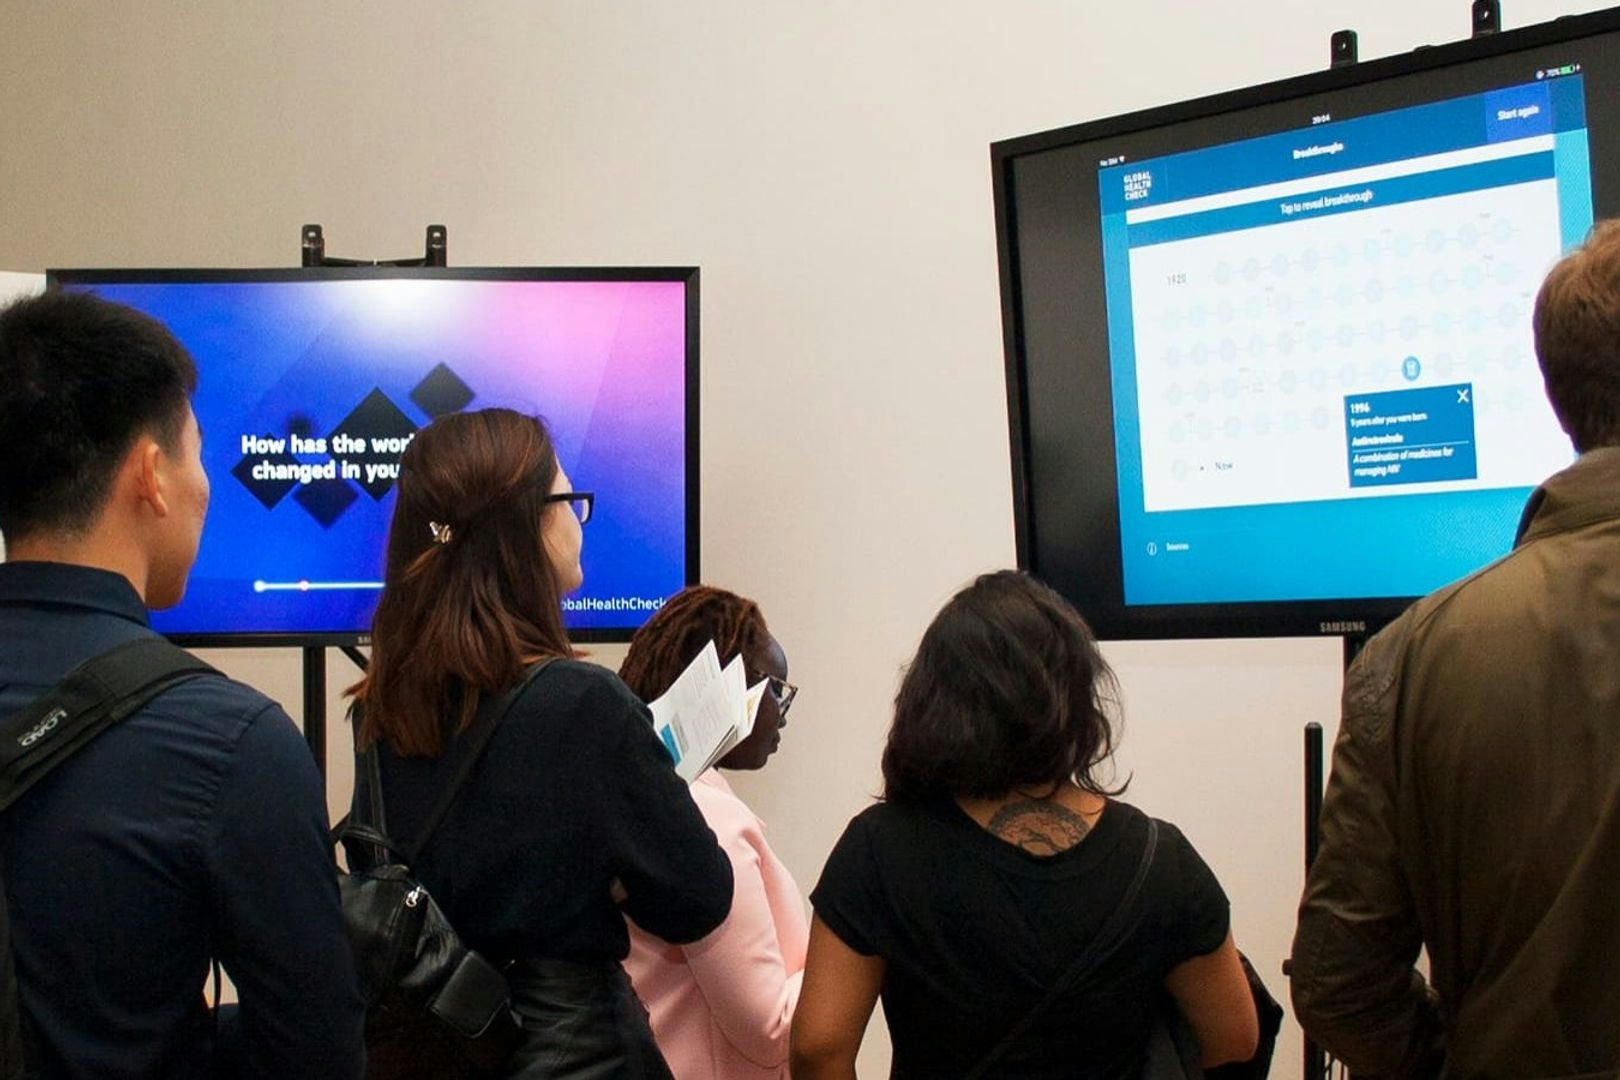 A photo taken during the Global Health Check presentation. It shows a group of people looking at two television screens on stands both displaying different parts of the Global Health Check interactive.